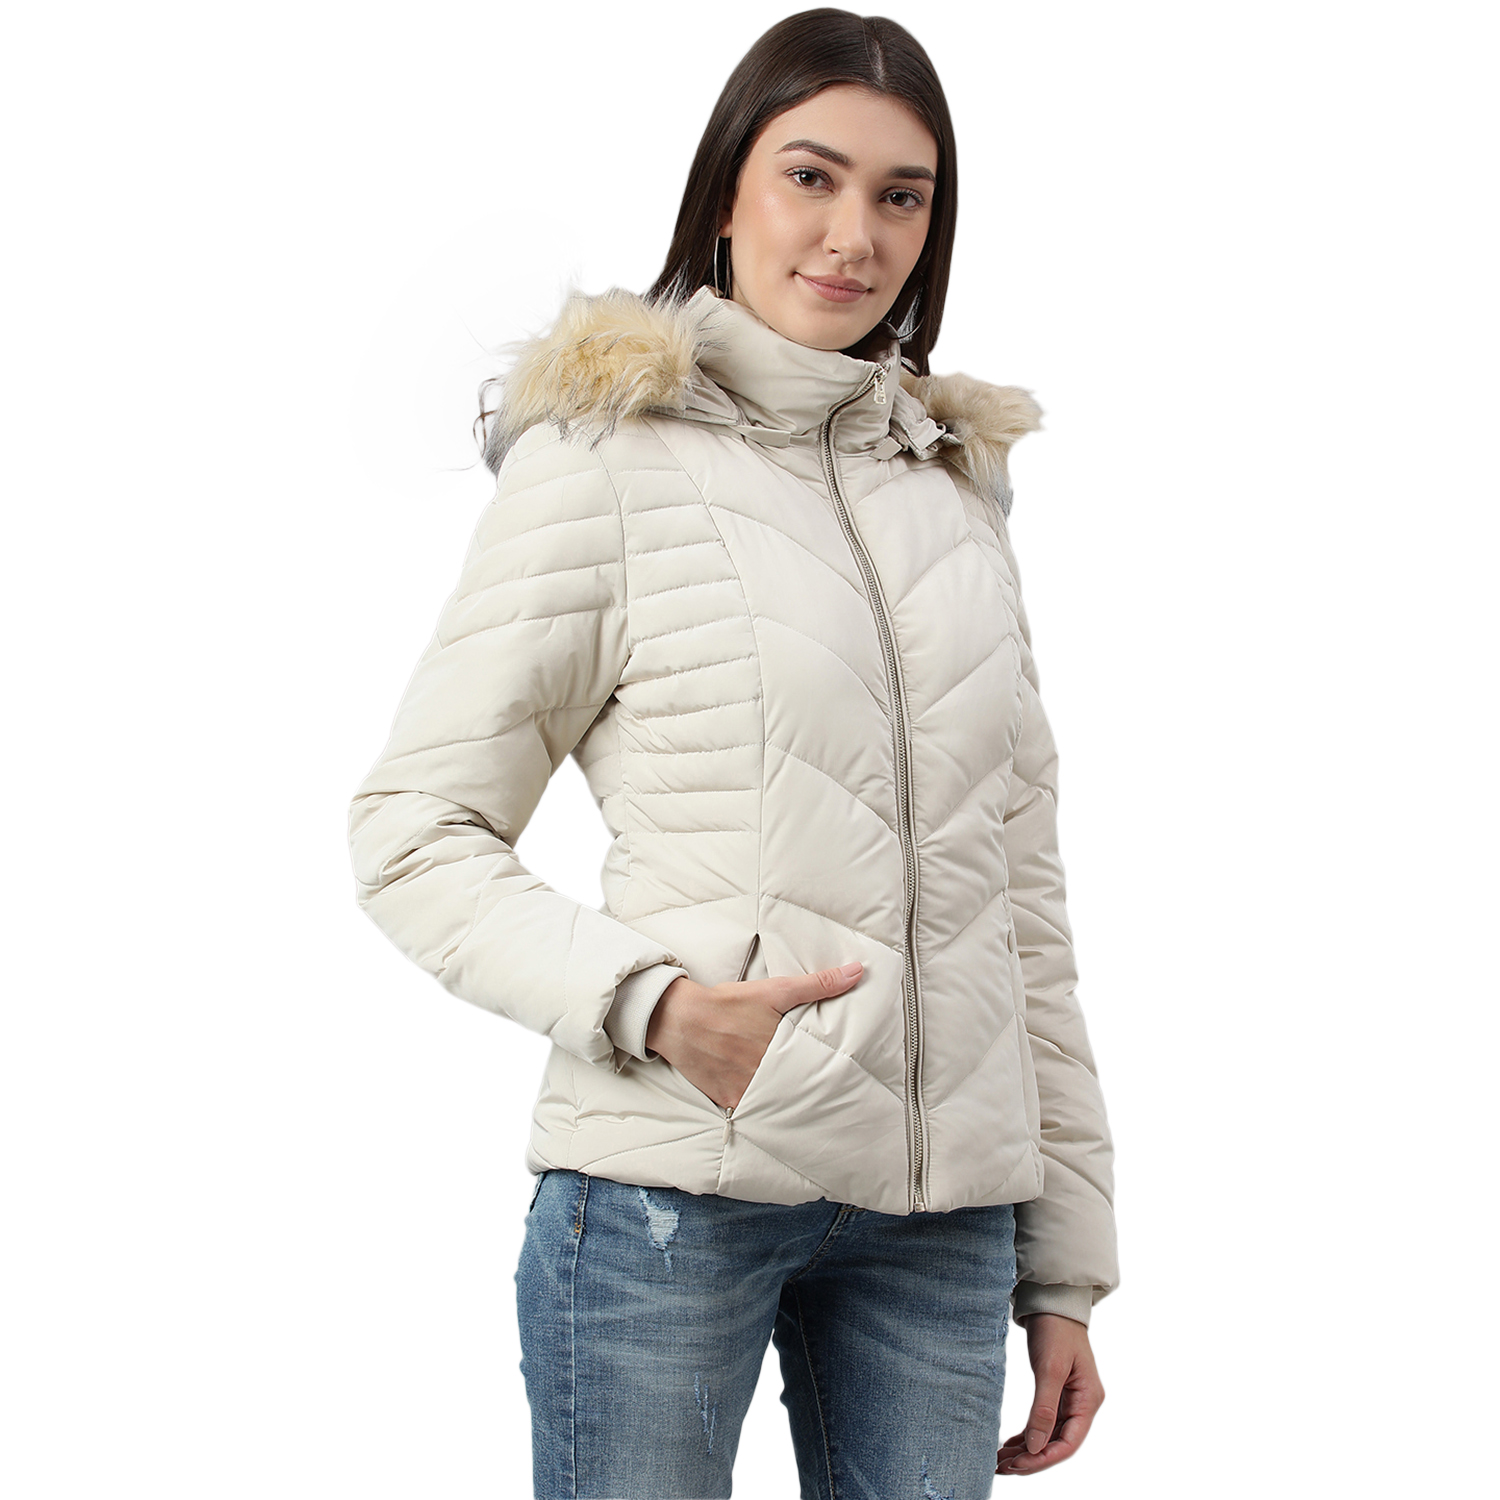 Feather Grey quilted jacket for women